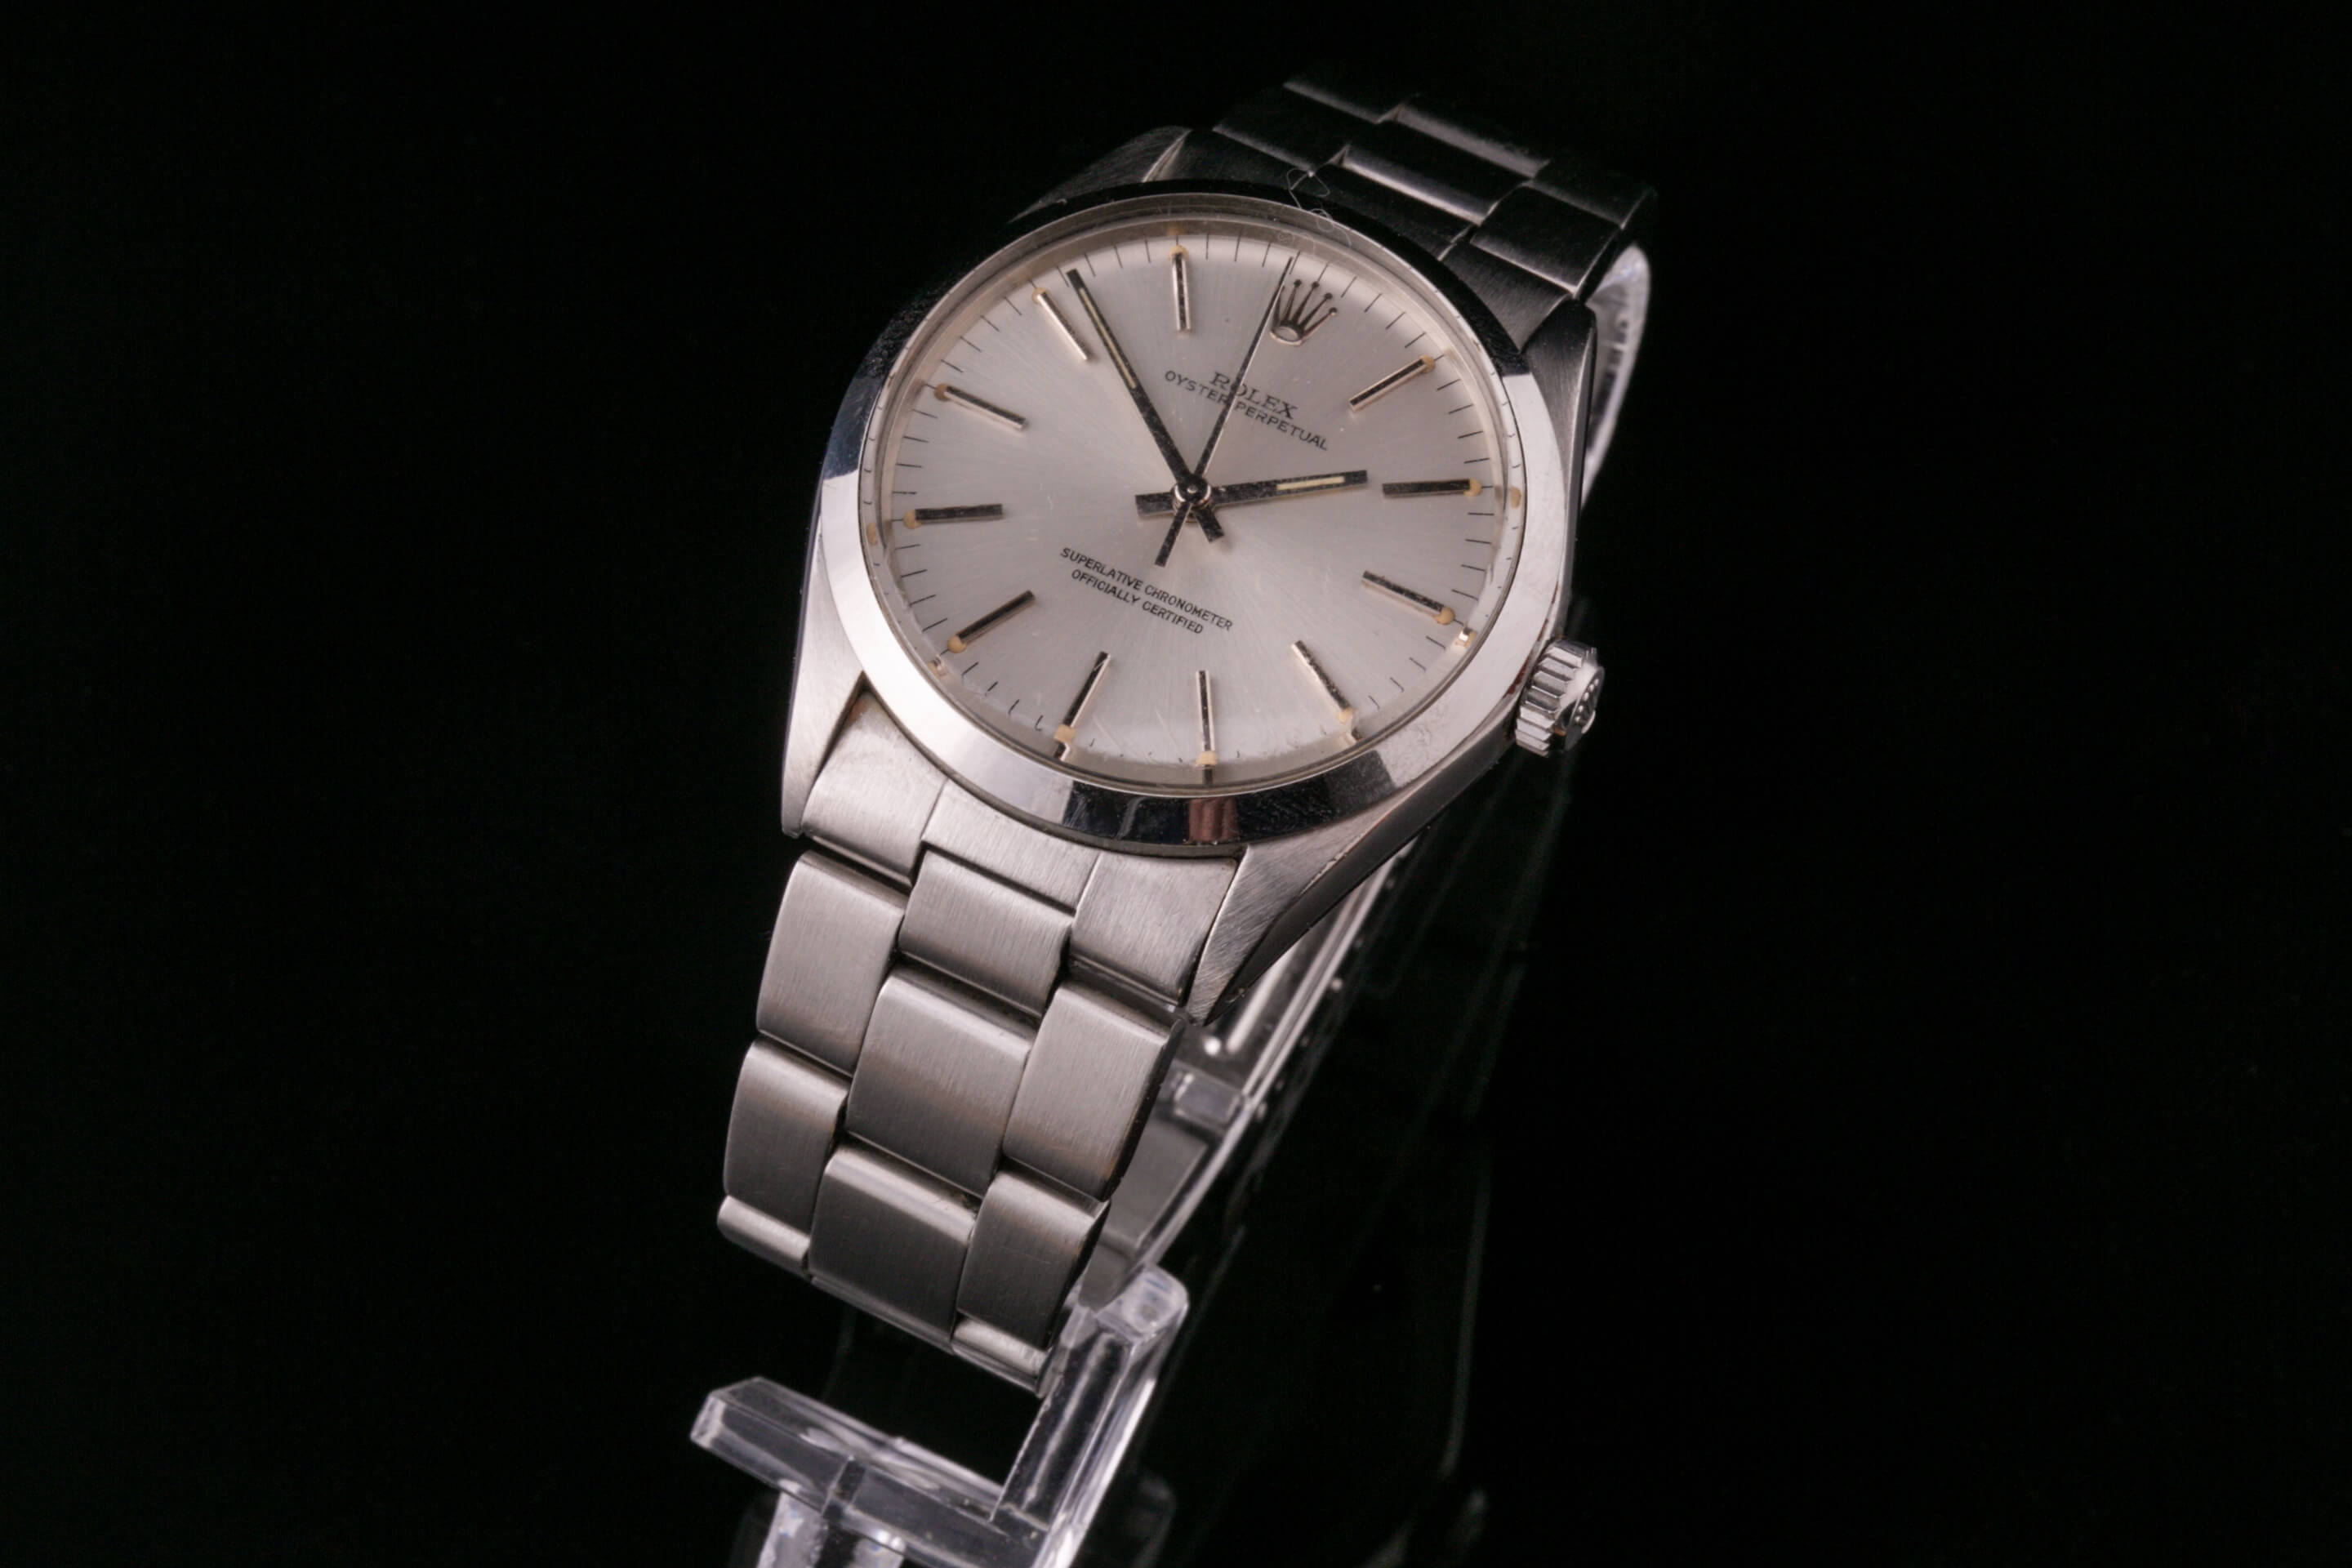 A 1976 Rolex Oyster Perpetual ref. 1002